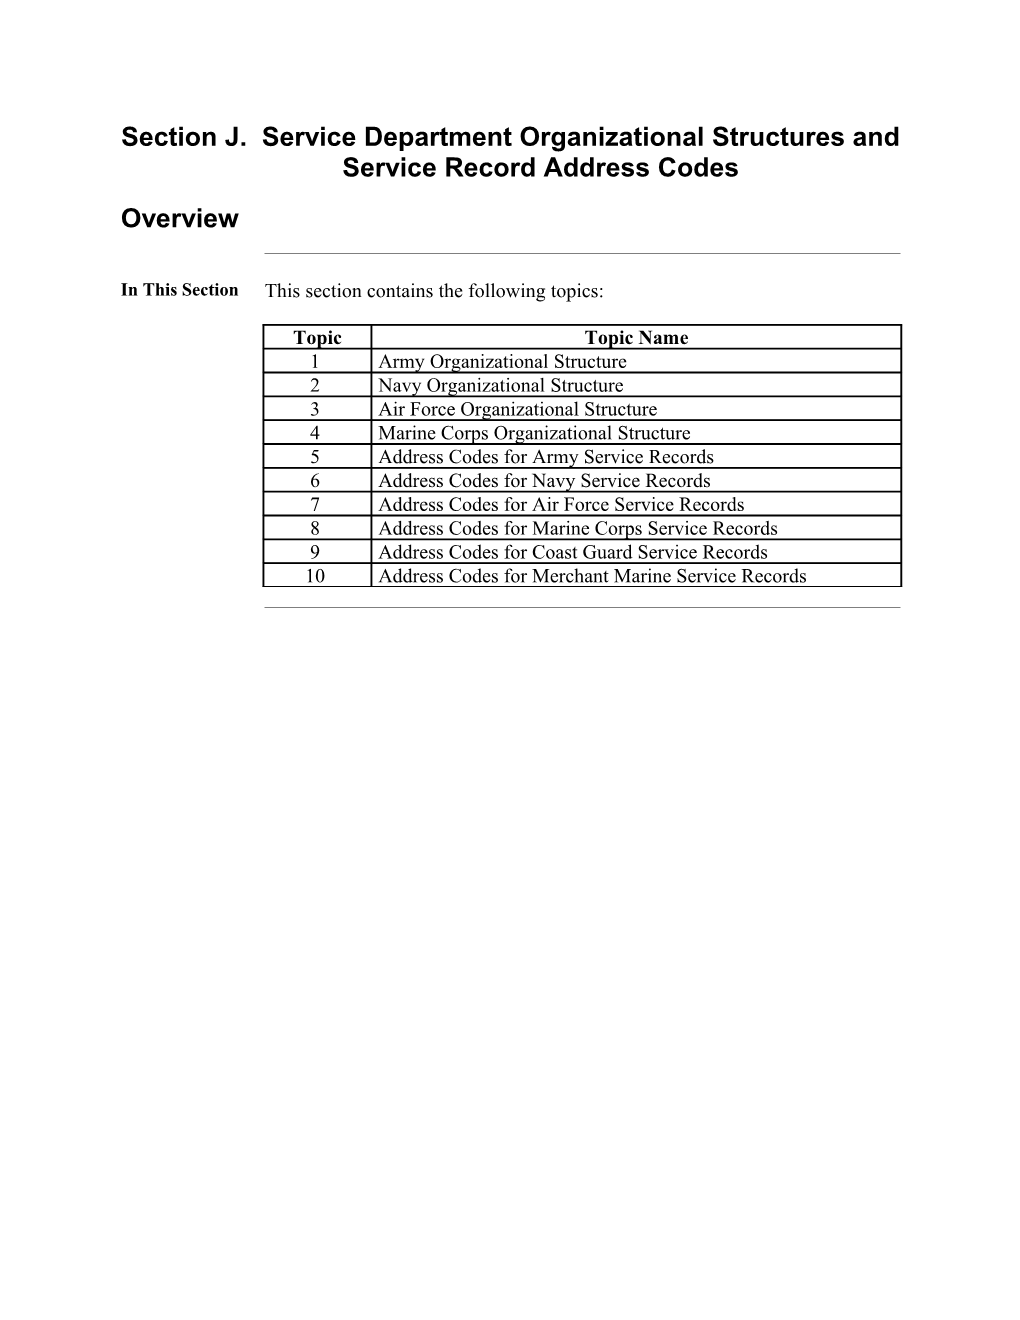 Service Department Organization Structures and Service Record Address Codes (U.S. Department